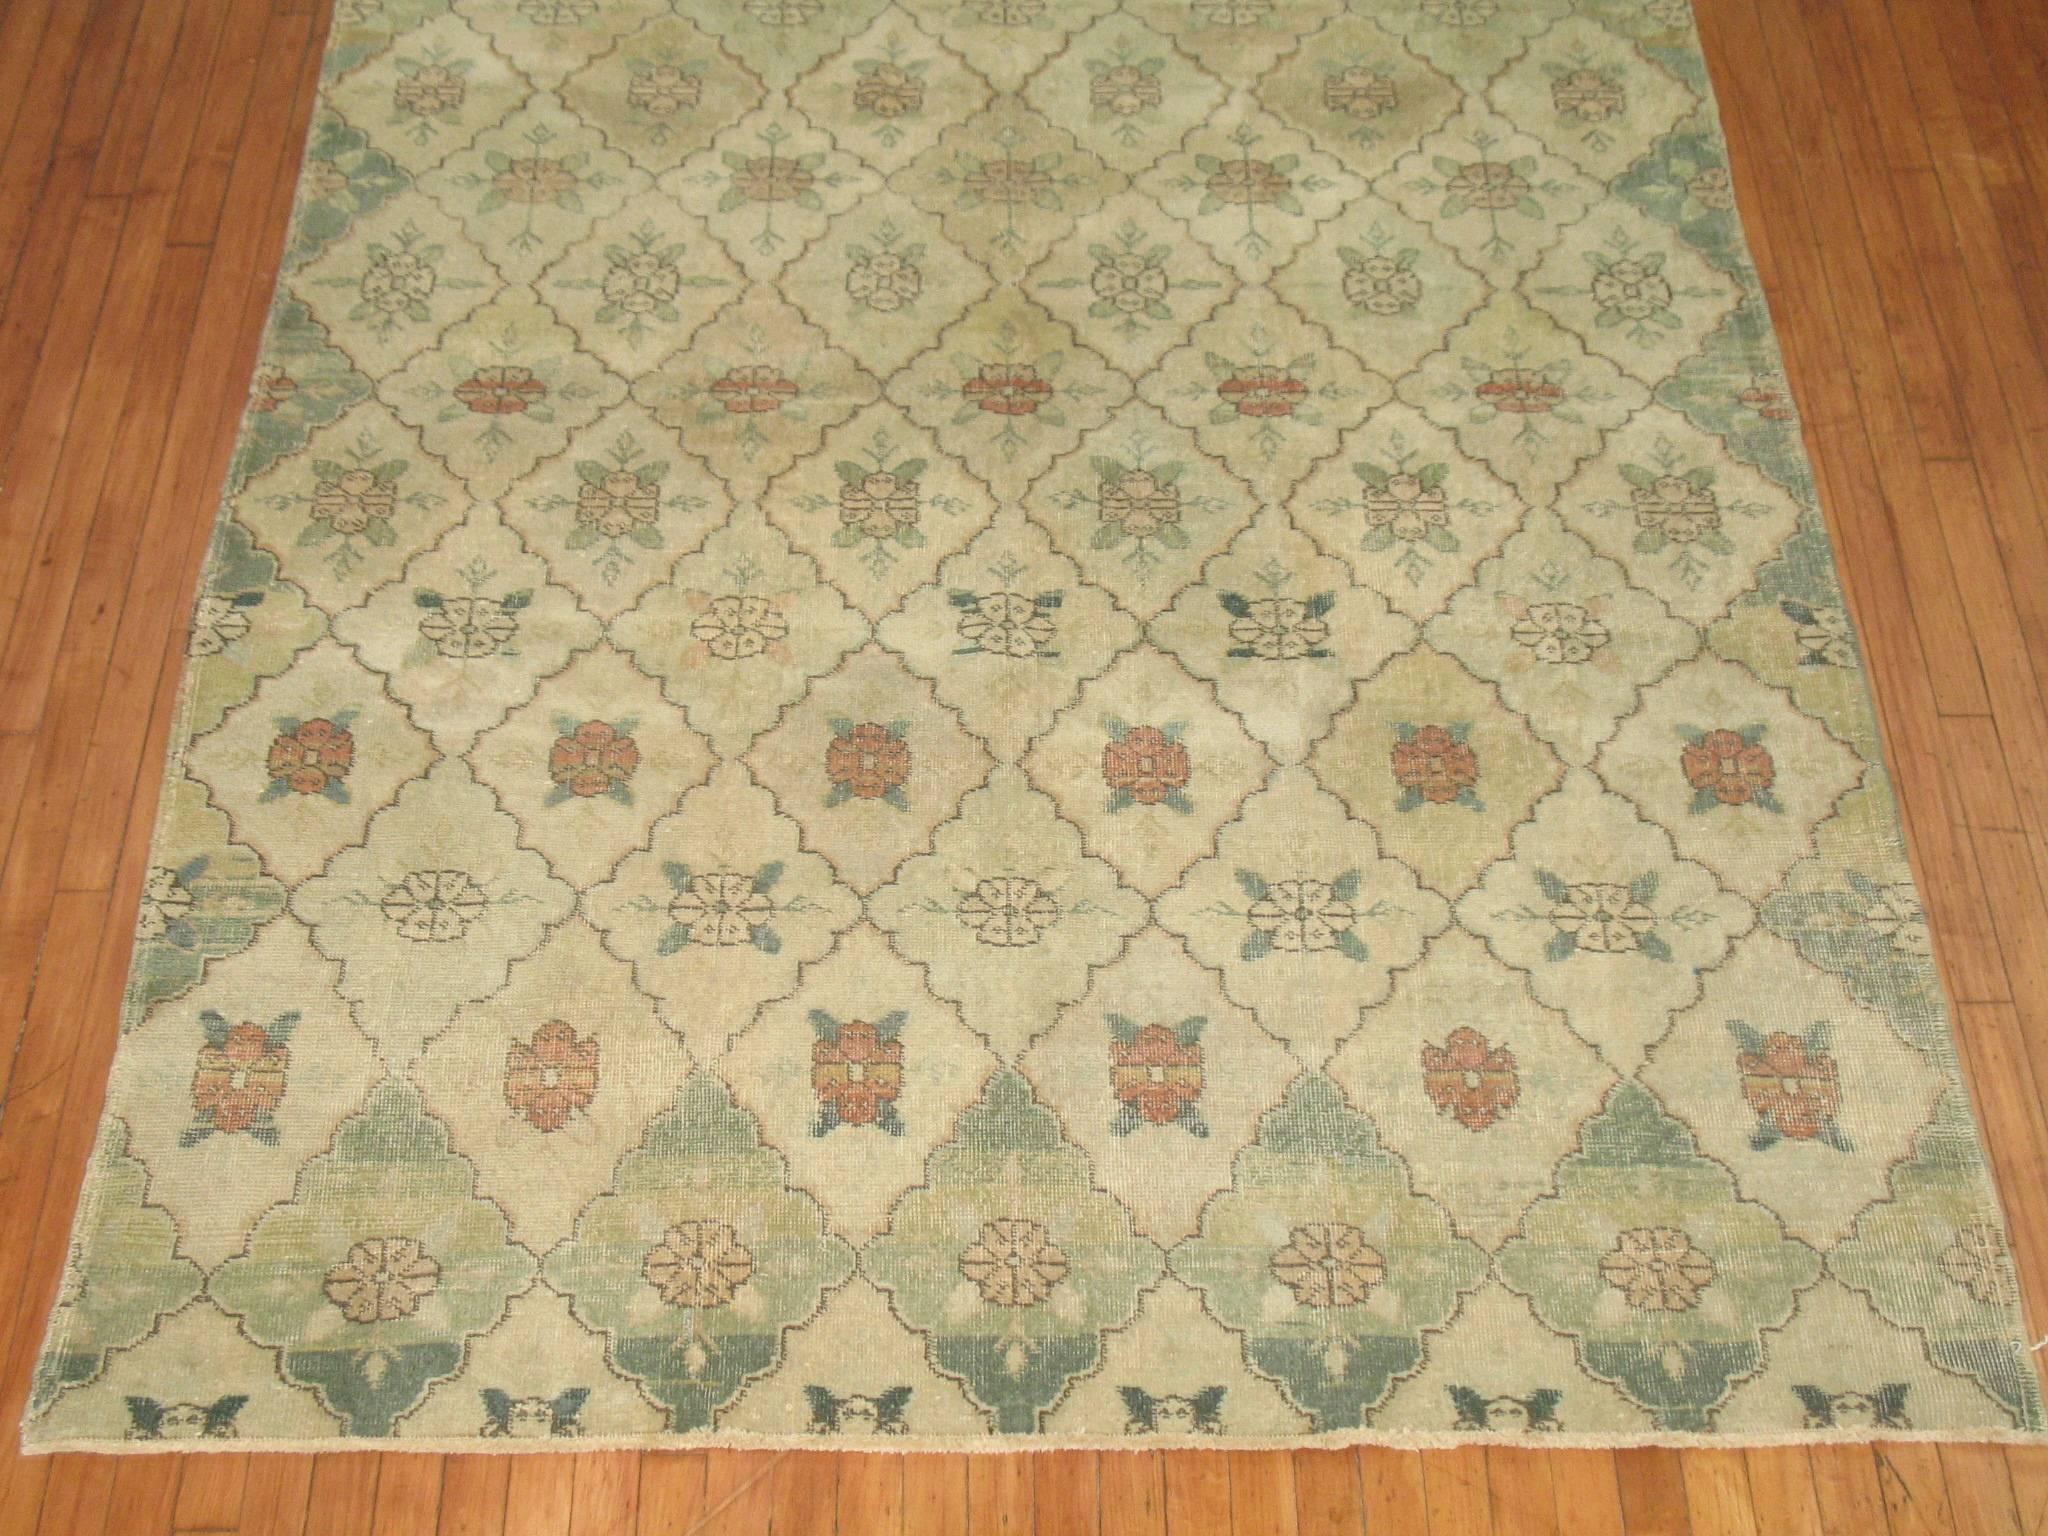 Vintage Turkish Deco rug with an all-over repetitive design in soft green hues.

Measures: 6'1